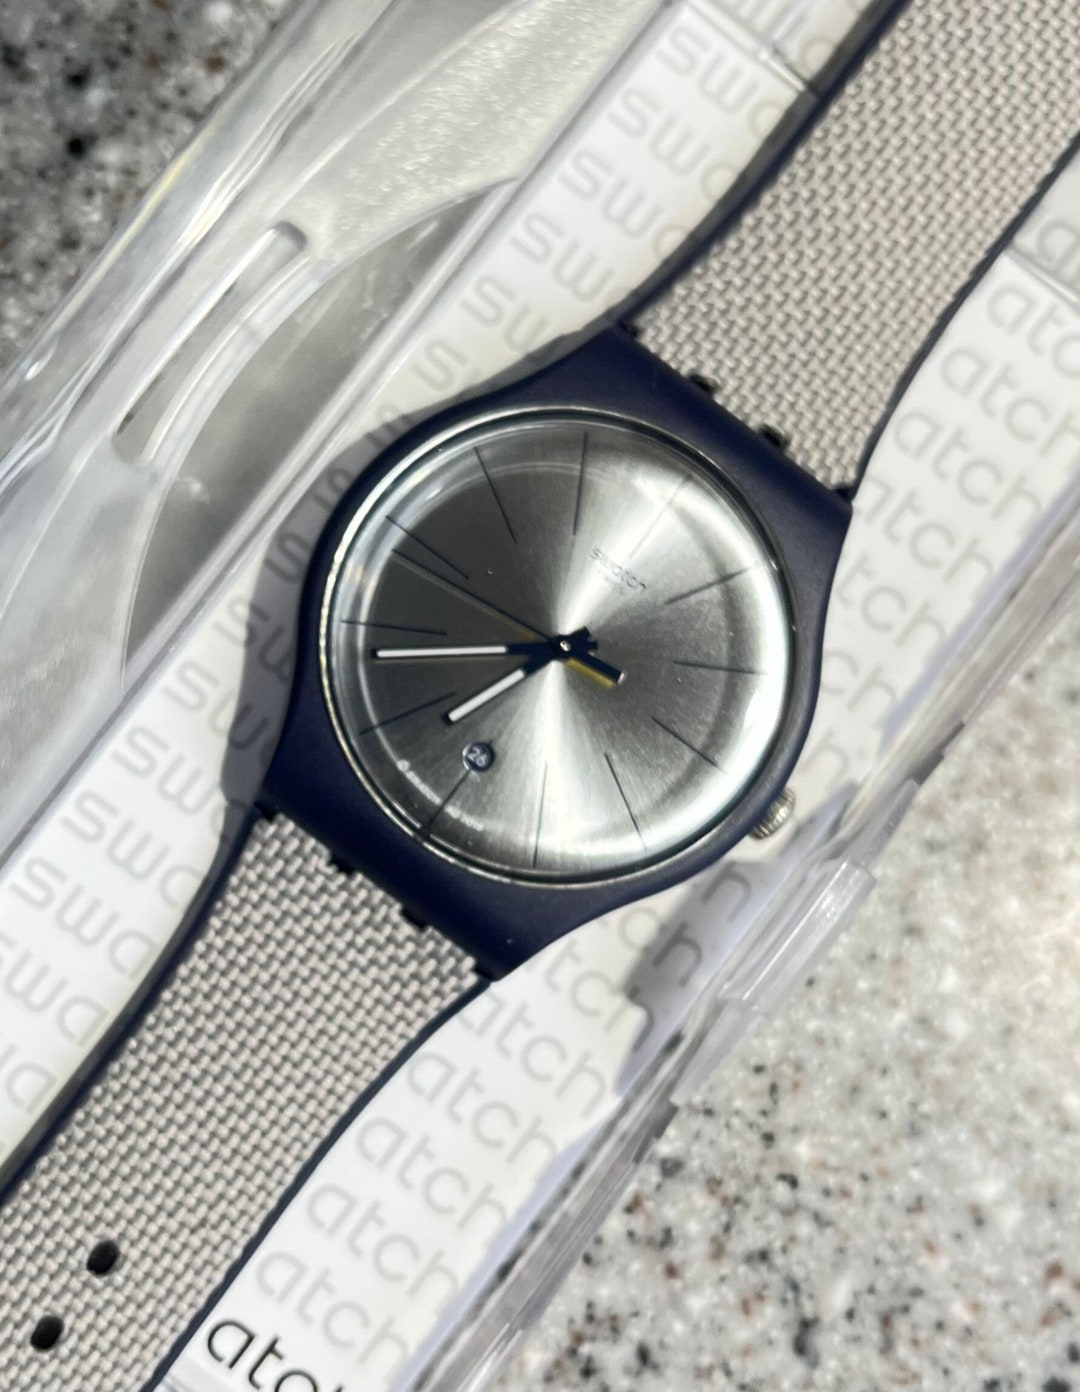 Swatch Watch 41mm face New Never Worn mirrored face with navy Etsy 日本